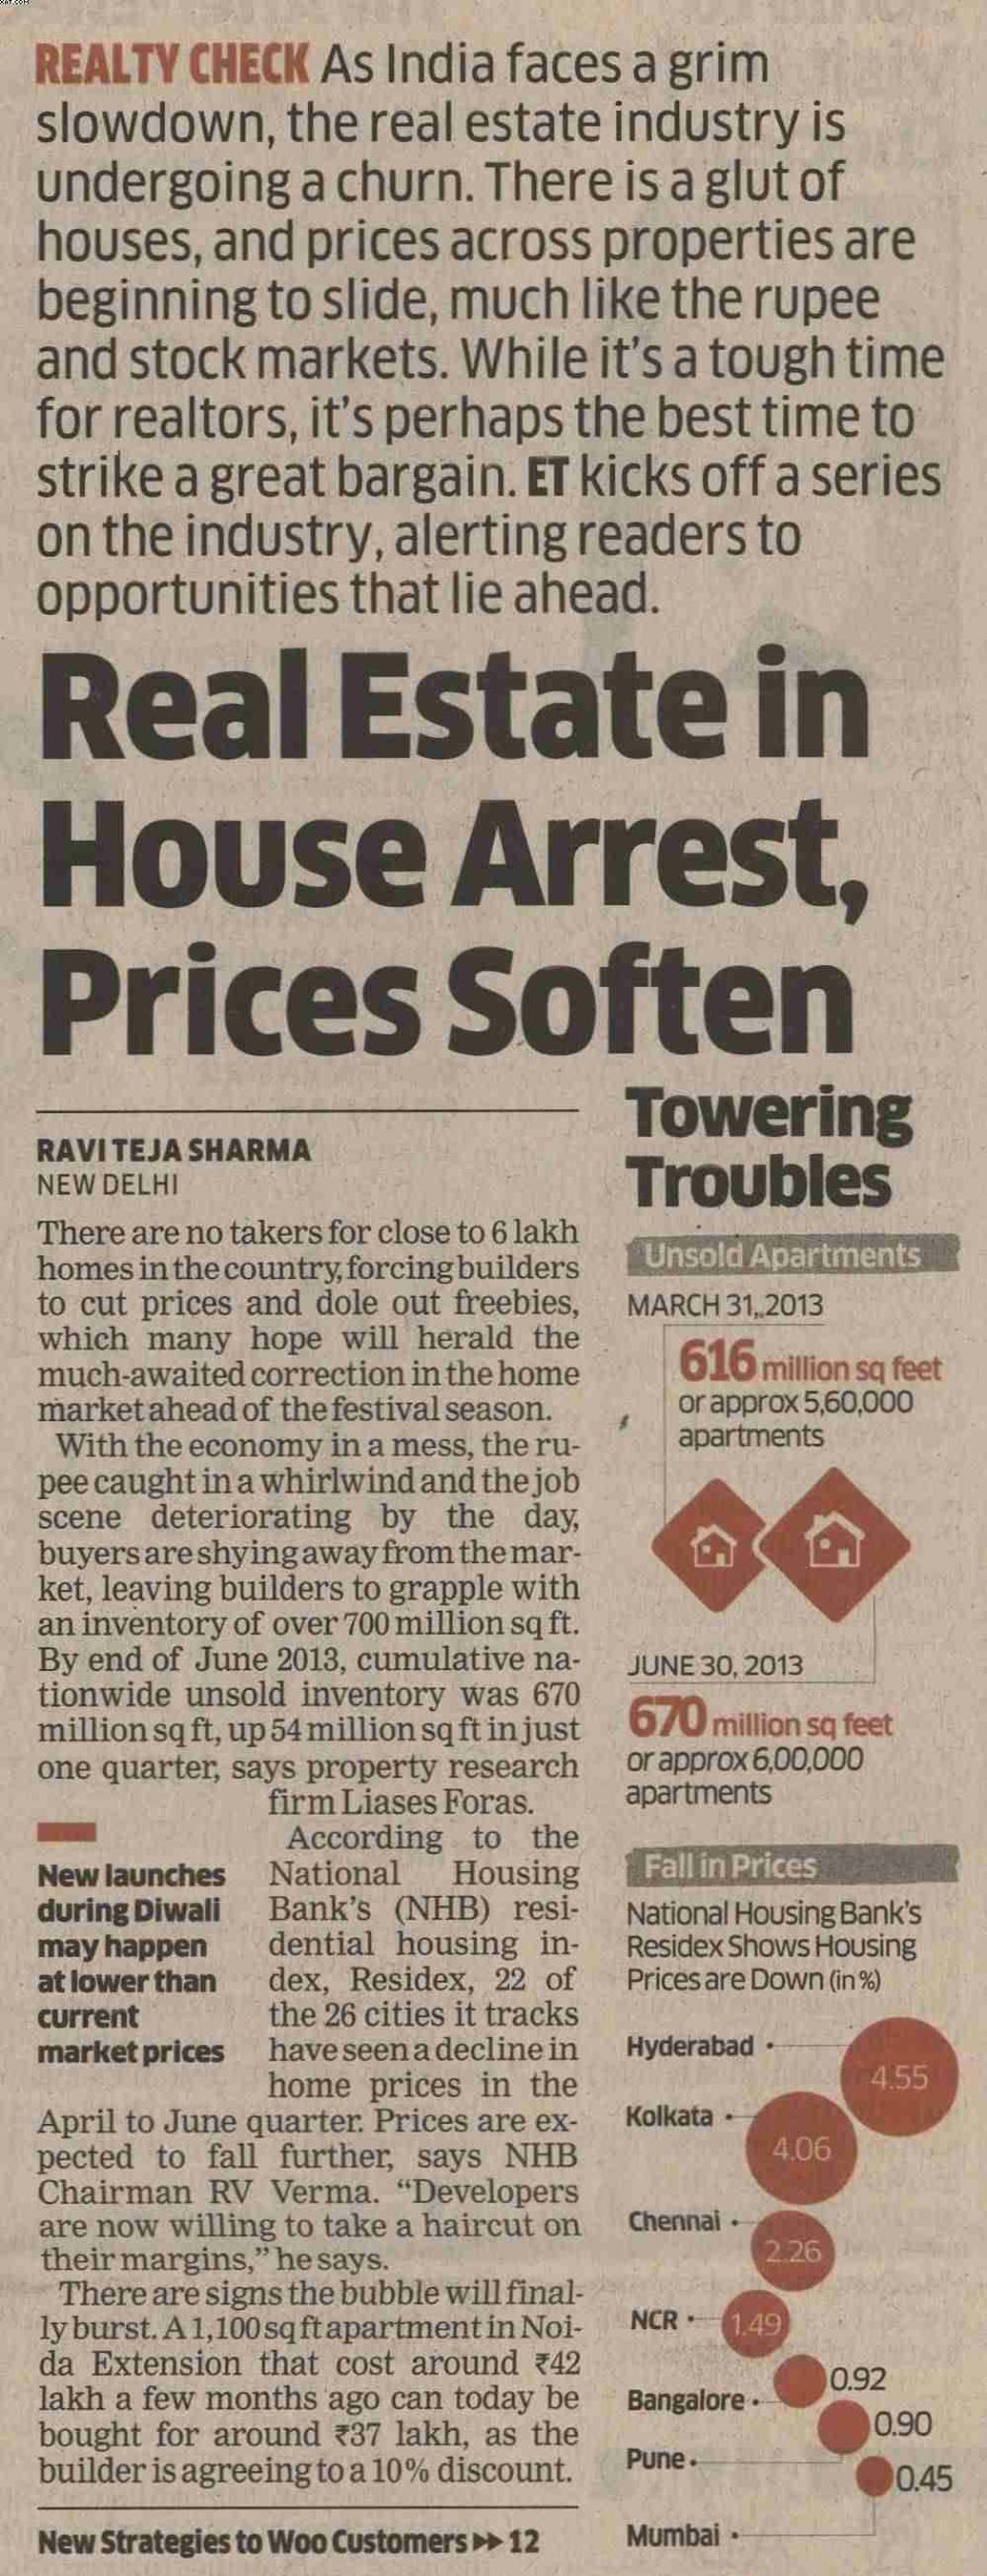 Real Estate in house arrest, prices soften